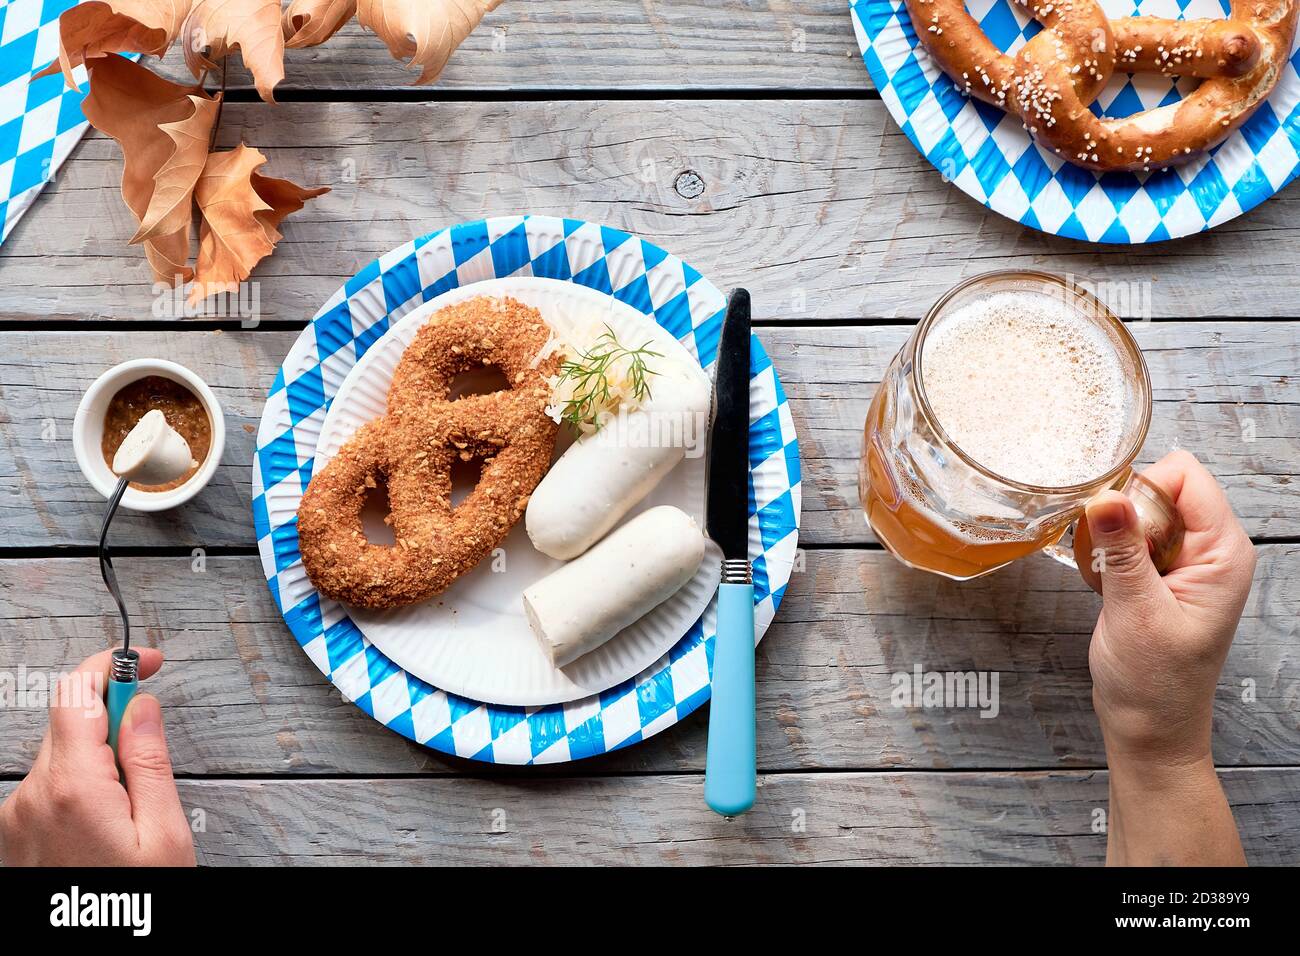 Celebrating Oktoberfest alone. Traditional food and beer, weisswurst sausage and pretzels. Stock Photo